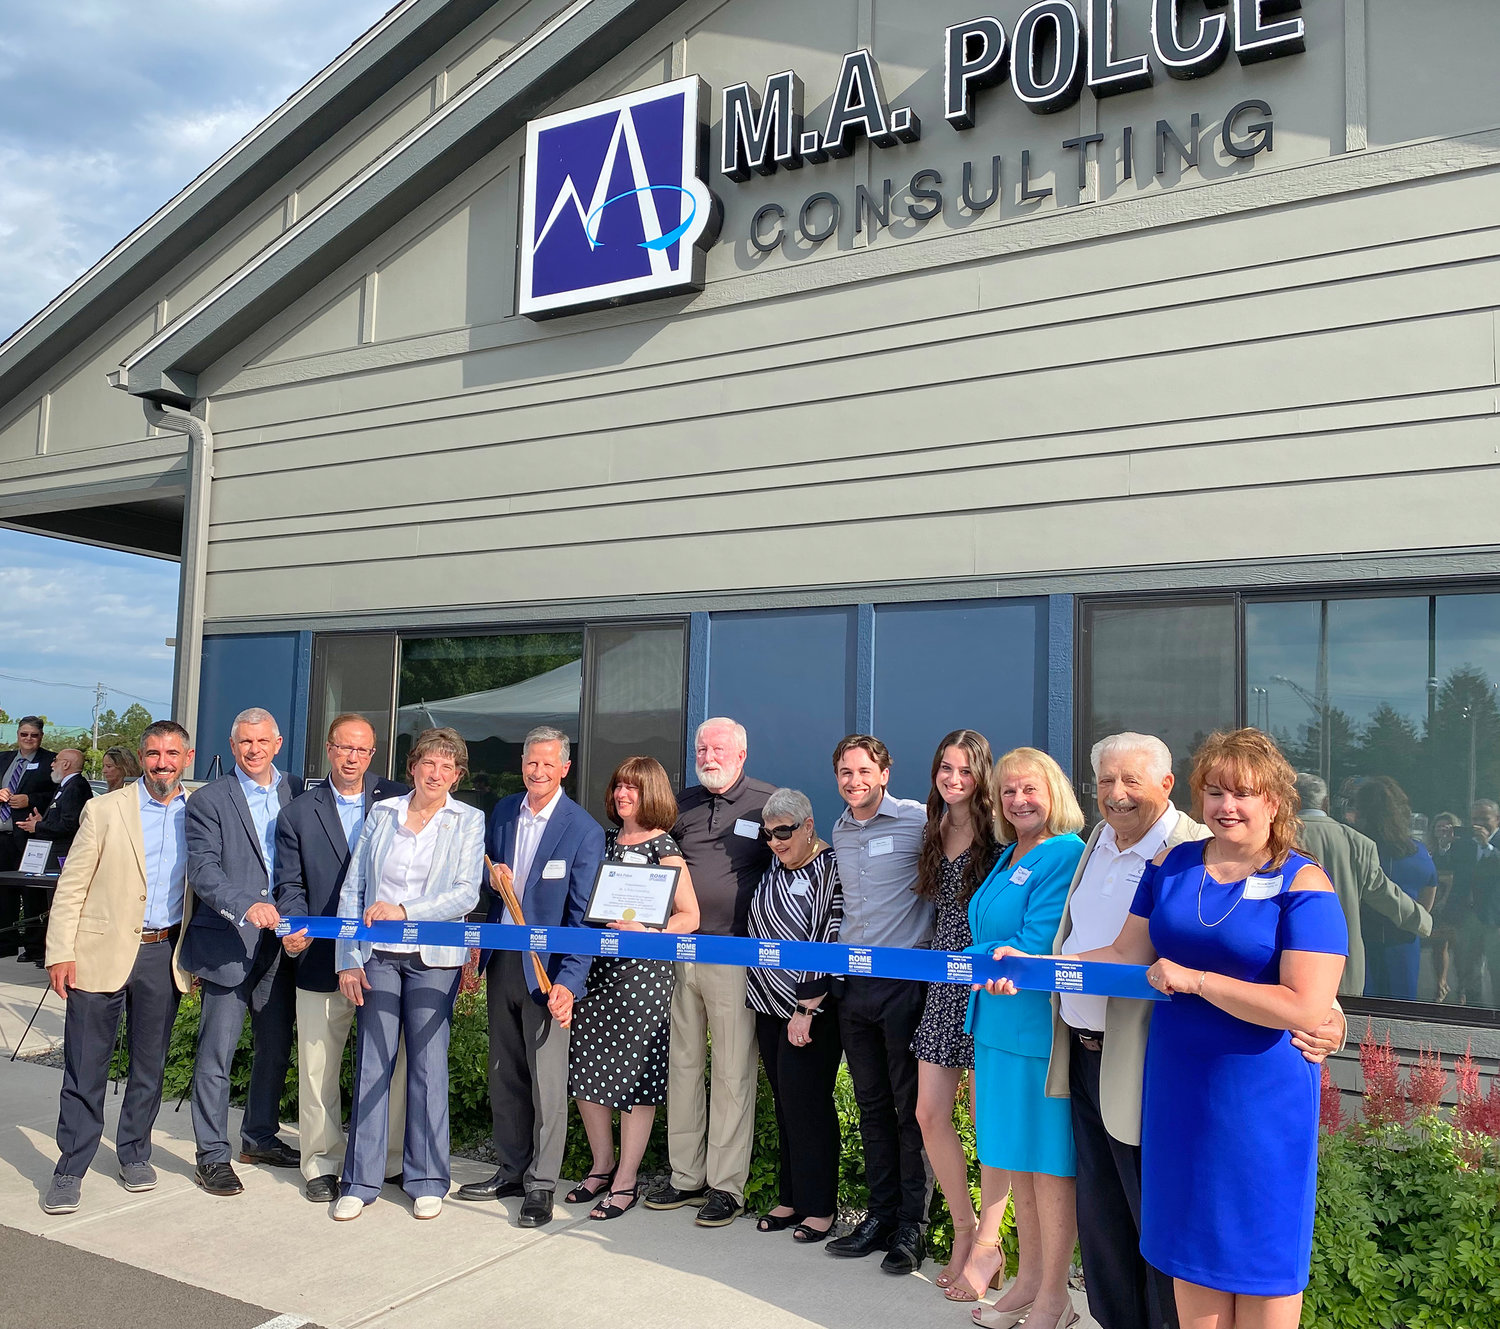 M.A. Polce, 401 Phoenix Drive, Rome, celebrated the facility’s almost 10,000 square-foot expansion during a ribbon cutting ceremony at Rome Area Chamber of Commerce’s Business After Hours event Wednesday. M.A. Polce President and CEO Michael A. Polce, fifth from left with scissors, cut the ceremonial ribbon.  He was joined by family members and staff, as well as, from left: Gregory A. Mattacola, first vice-chairman of the Board of Directors of the Rome Chamber; County Executive Anthony J. Picente Jr.; Sen. Joseph A. Griffo, R-47, Rome; and Mayor Jacqueline M. Izzo.